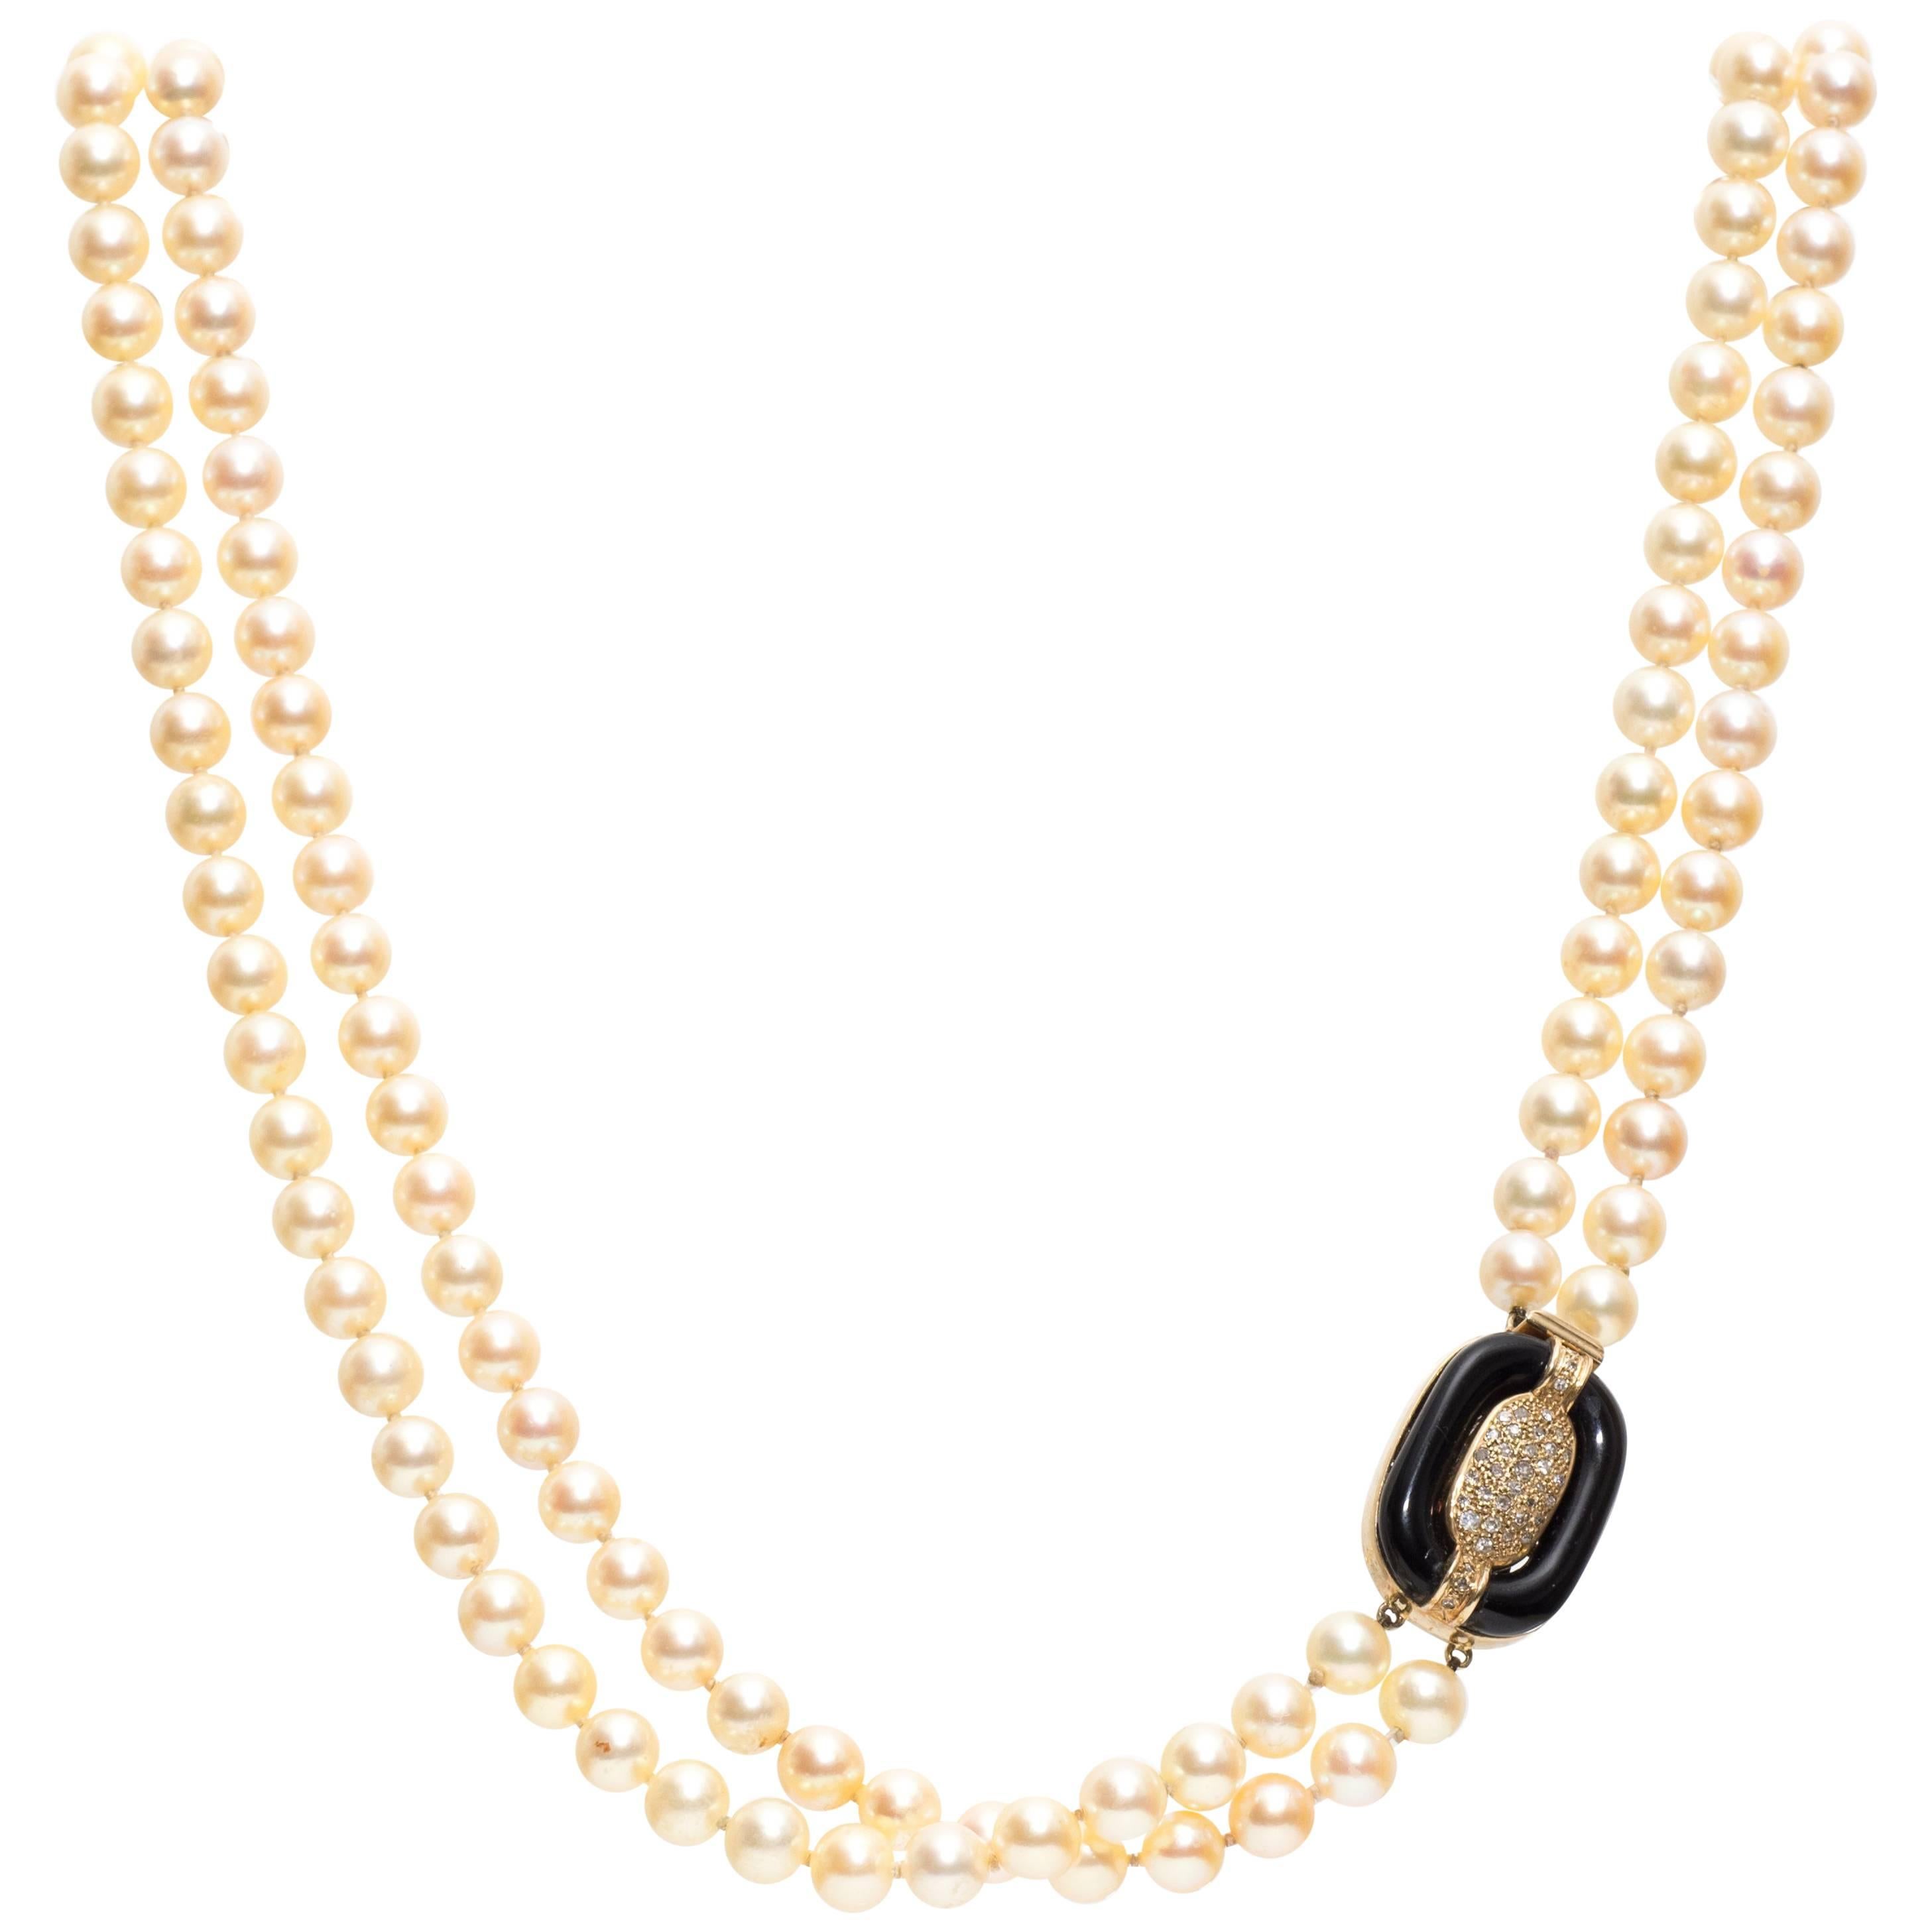 Extra Long Pearl Necklace, 18k Yellow Gold, Pearls & Diamonds, 1960s